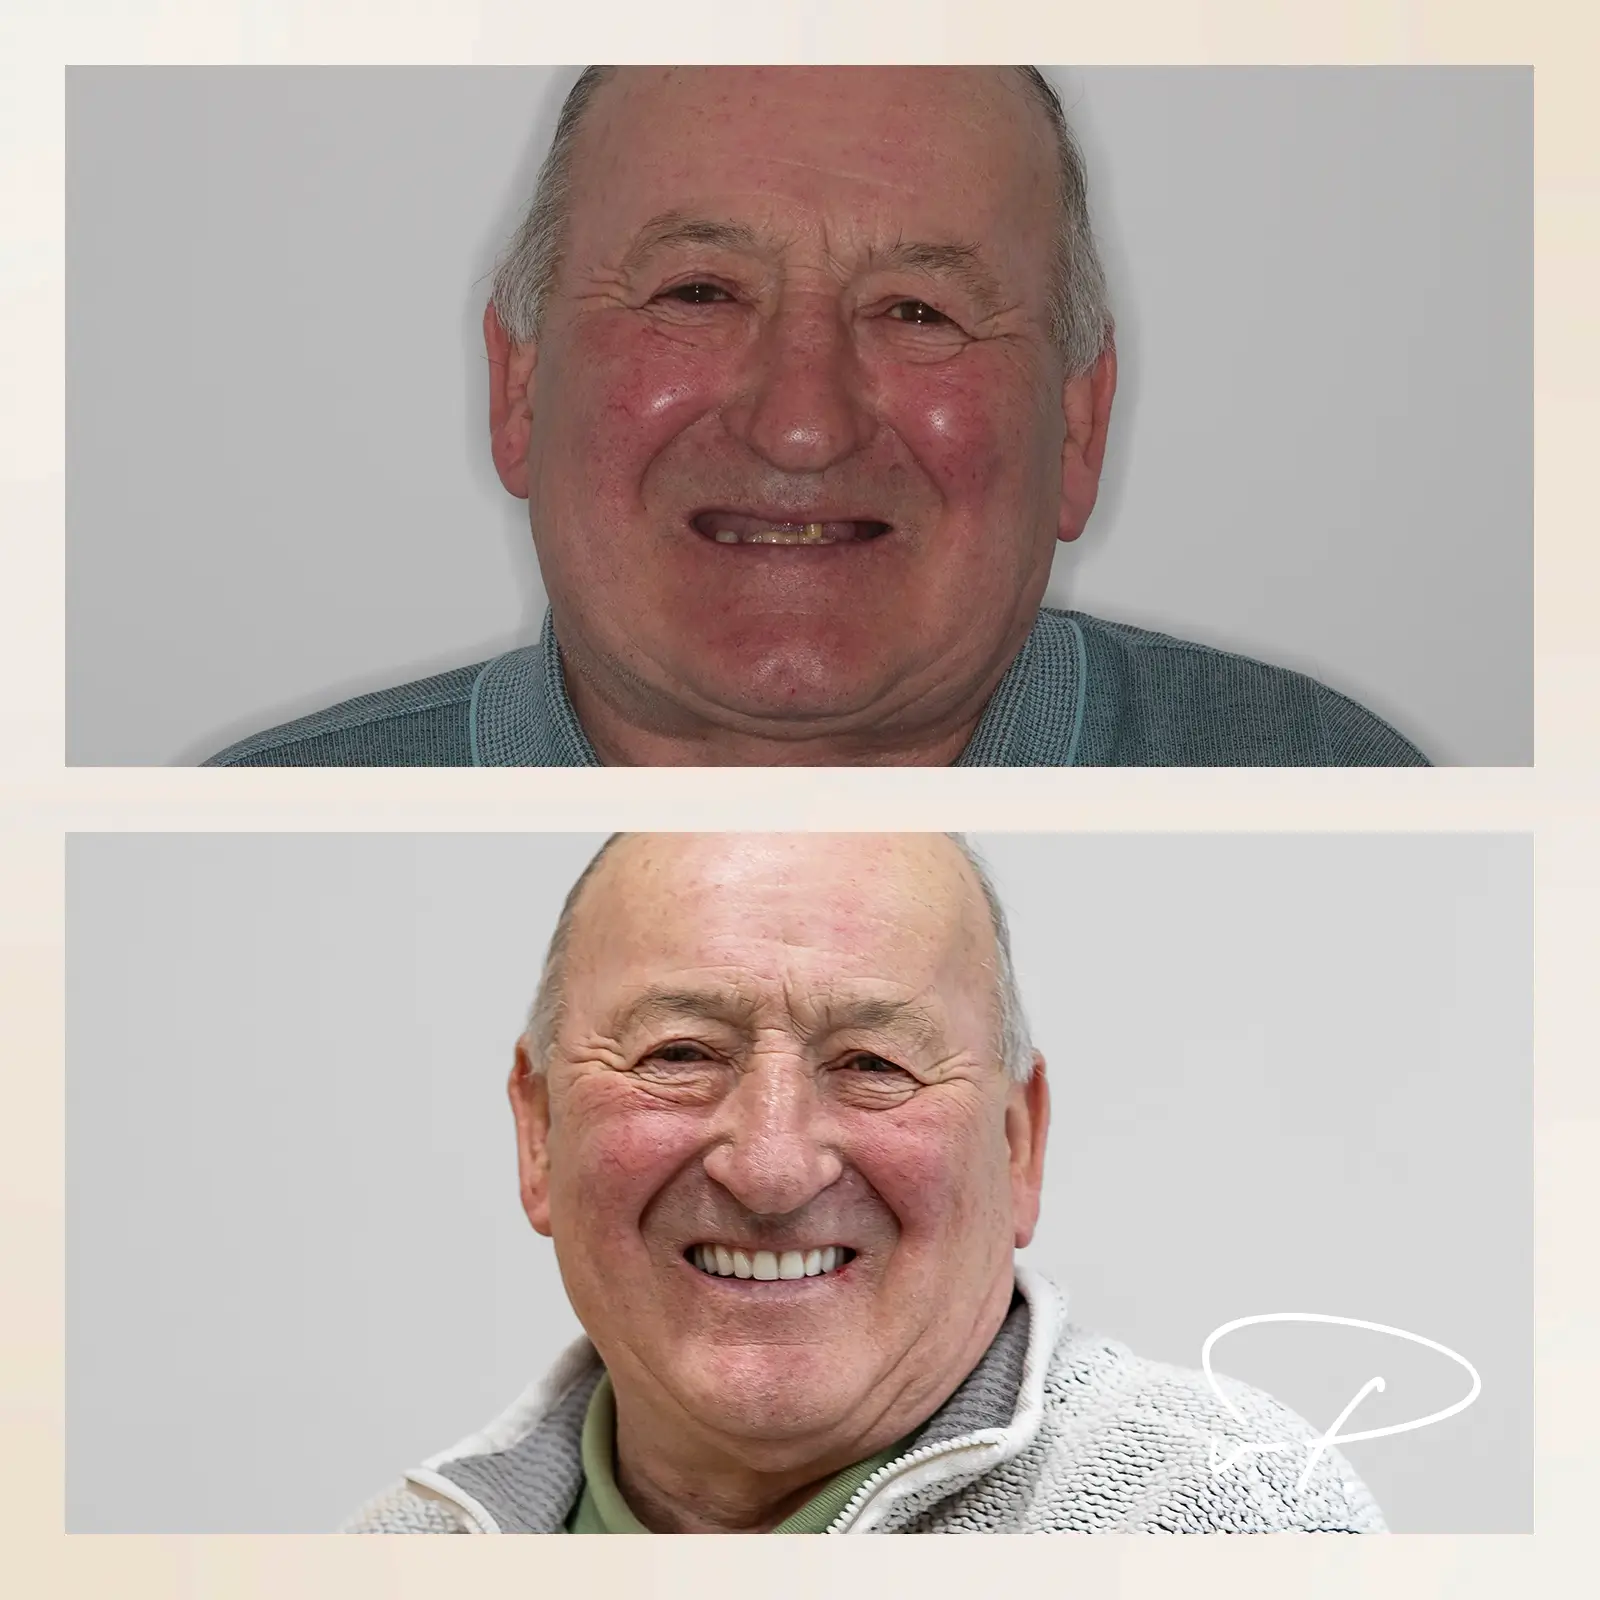 patrick before and after implant treatment - vp implantology